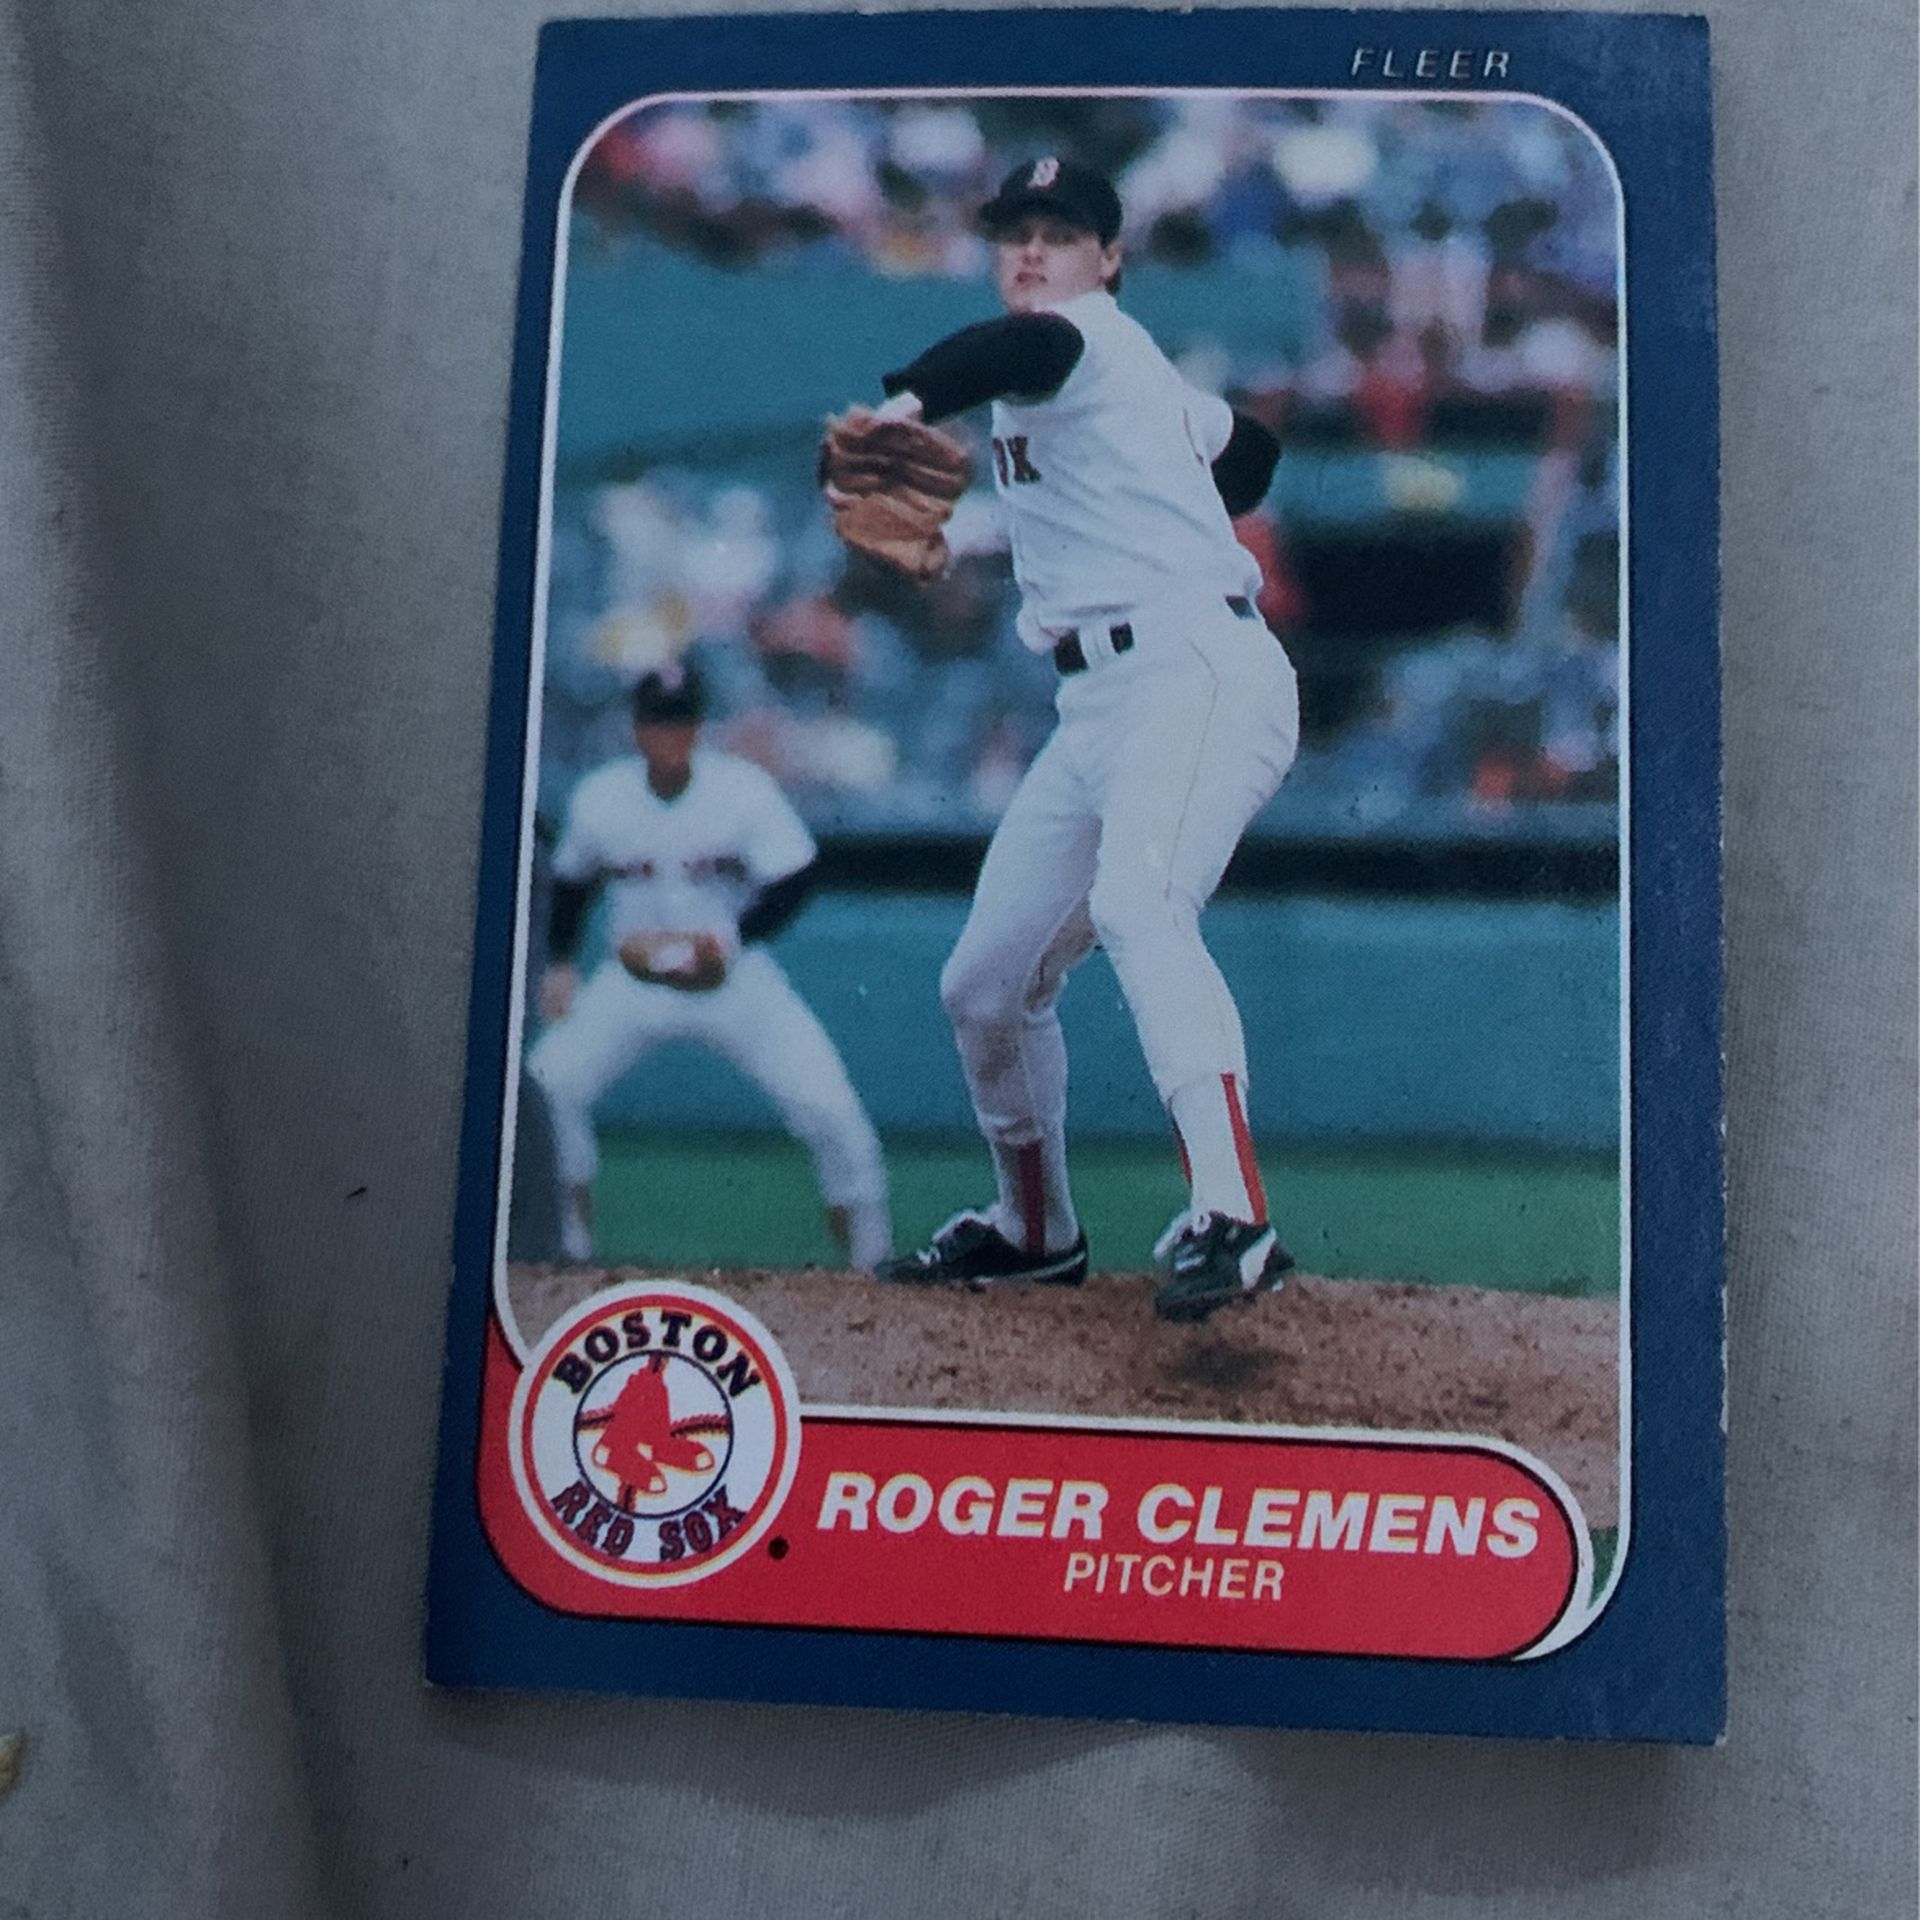 Roger Clemens pitcher baseball card for Sale in Pawtucket, RI